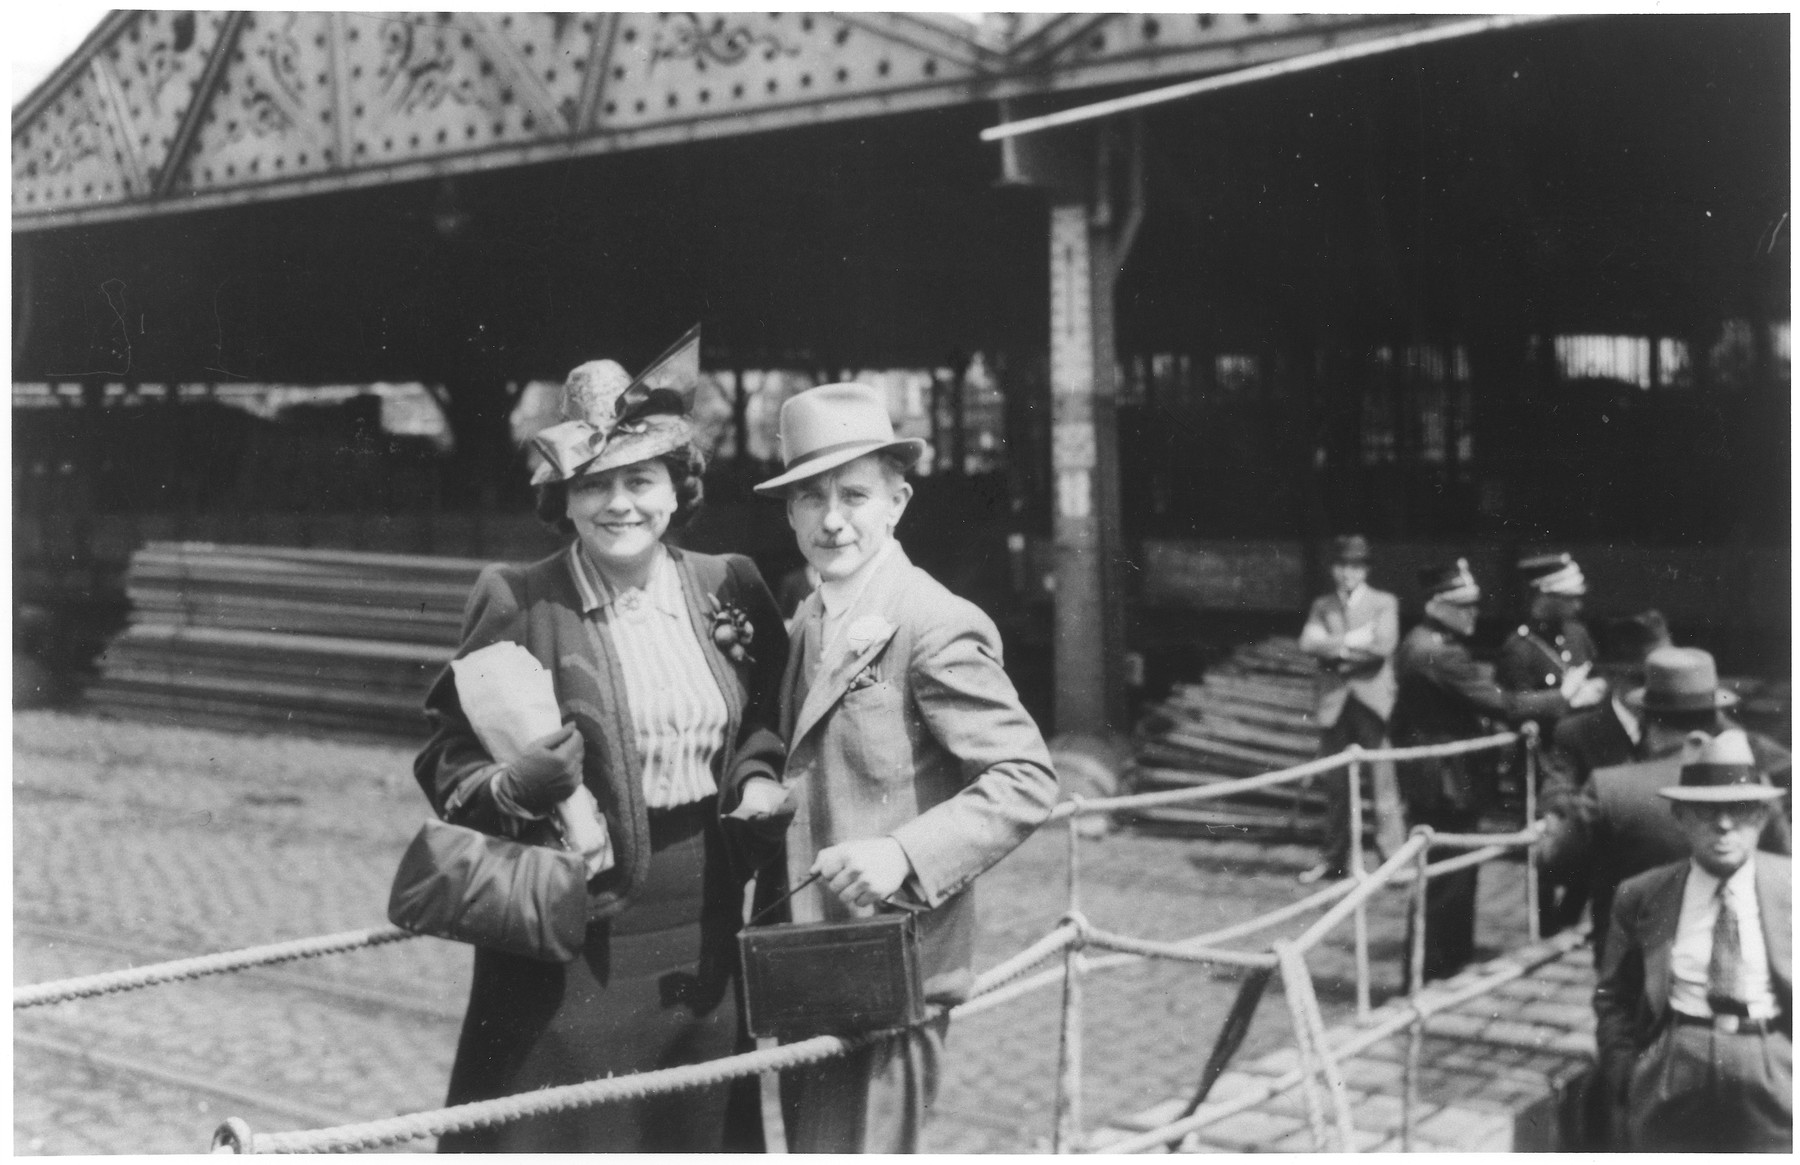 A Jewish refugee couple poses on the gangway of the MS St. Louis as they disembark from the ship in Antwerp.